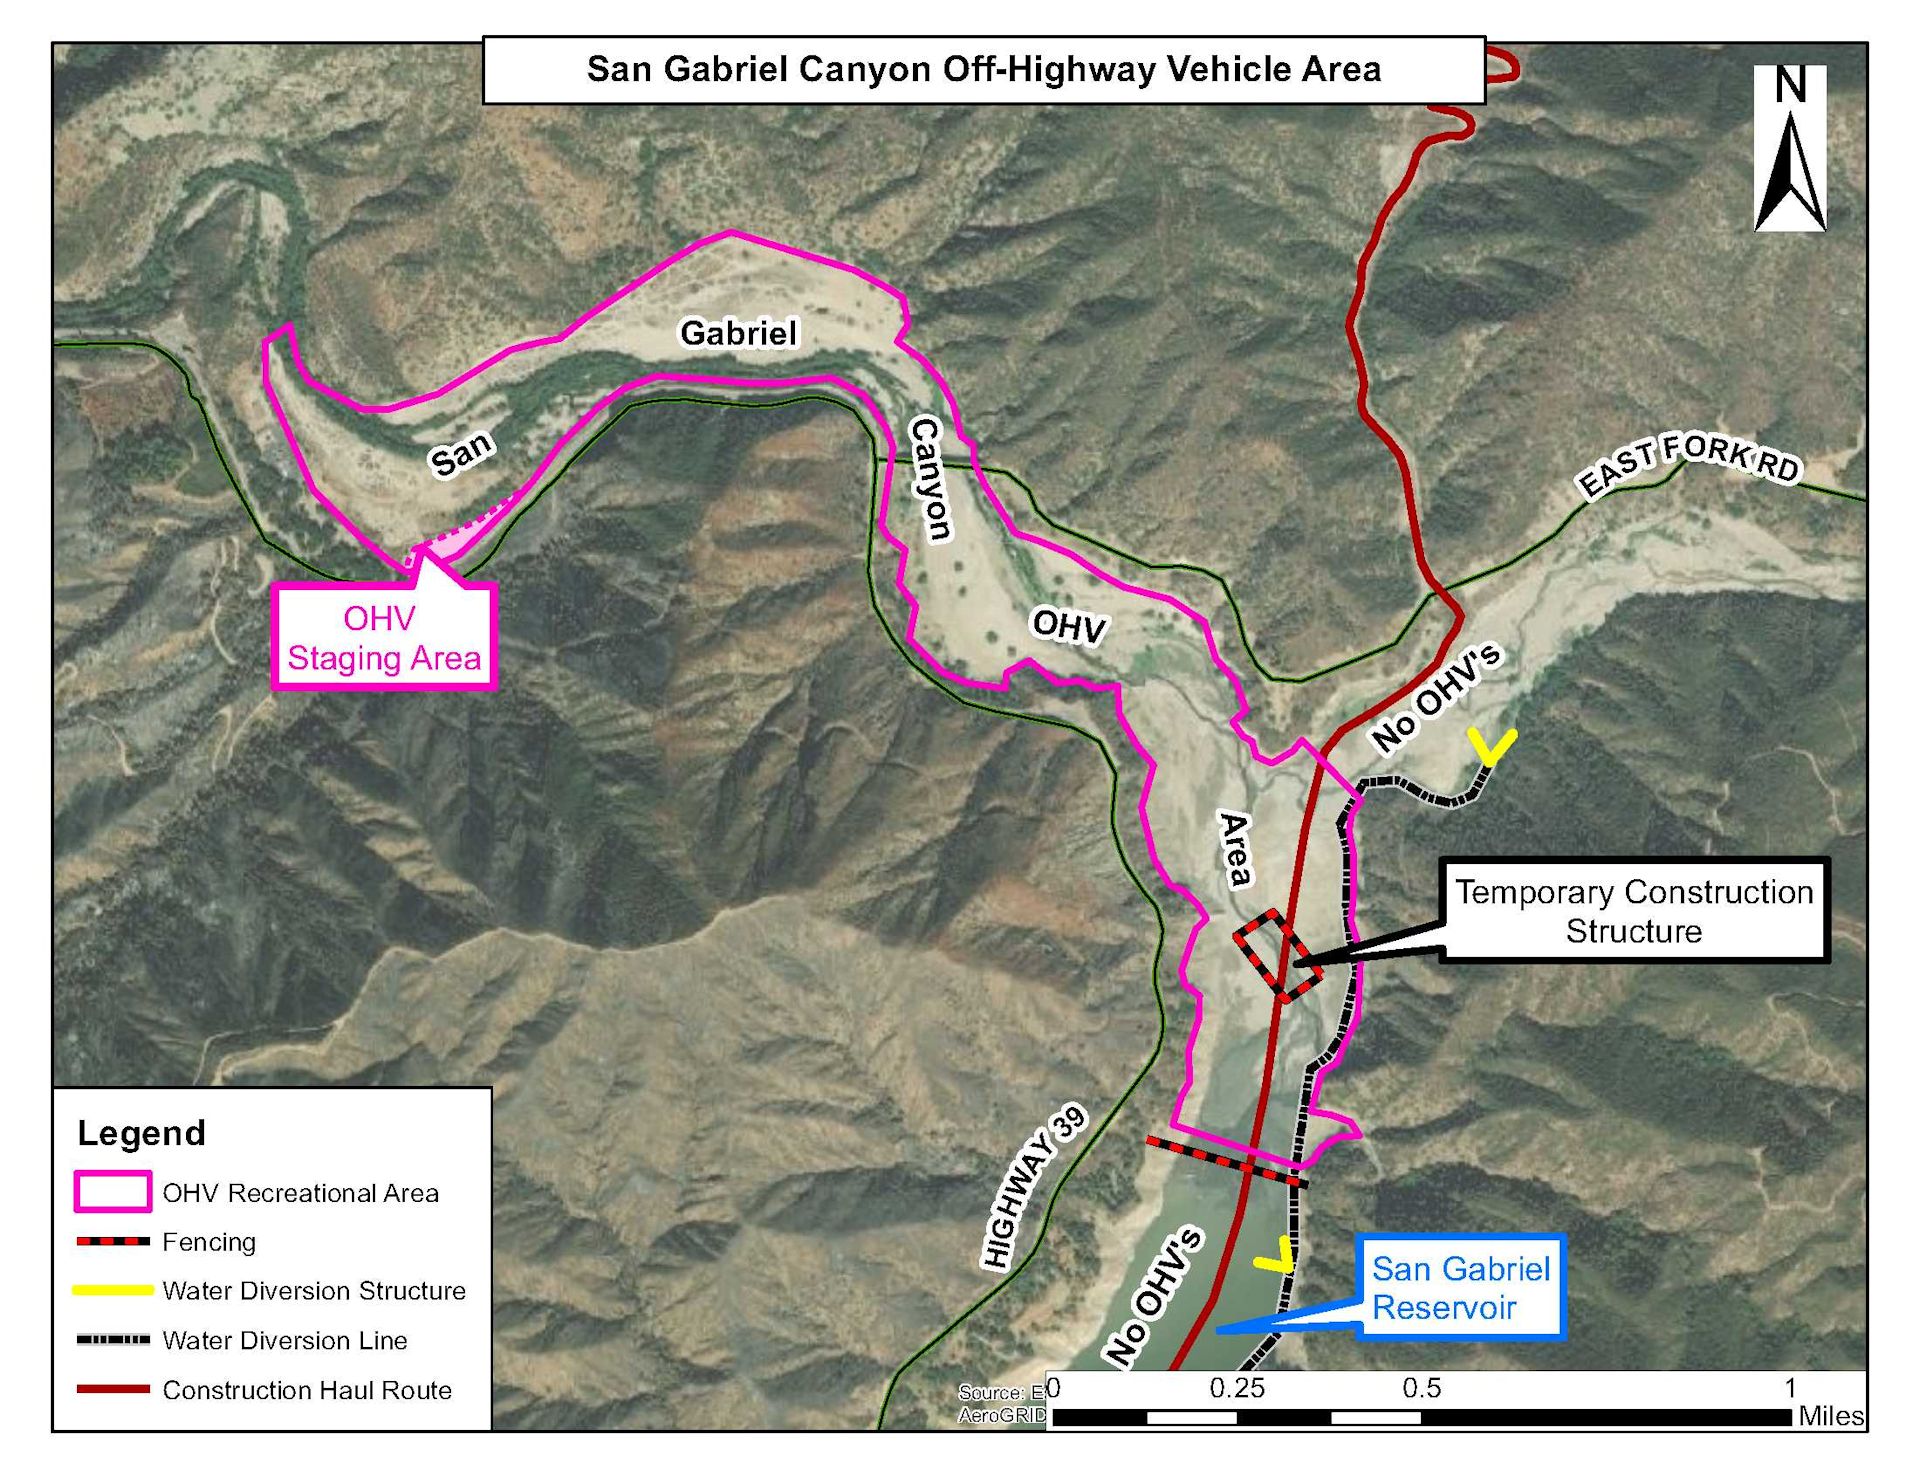 San Gabriel Canyon Off-Highway Vehicle Area